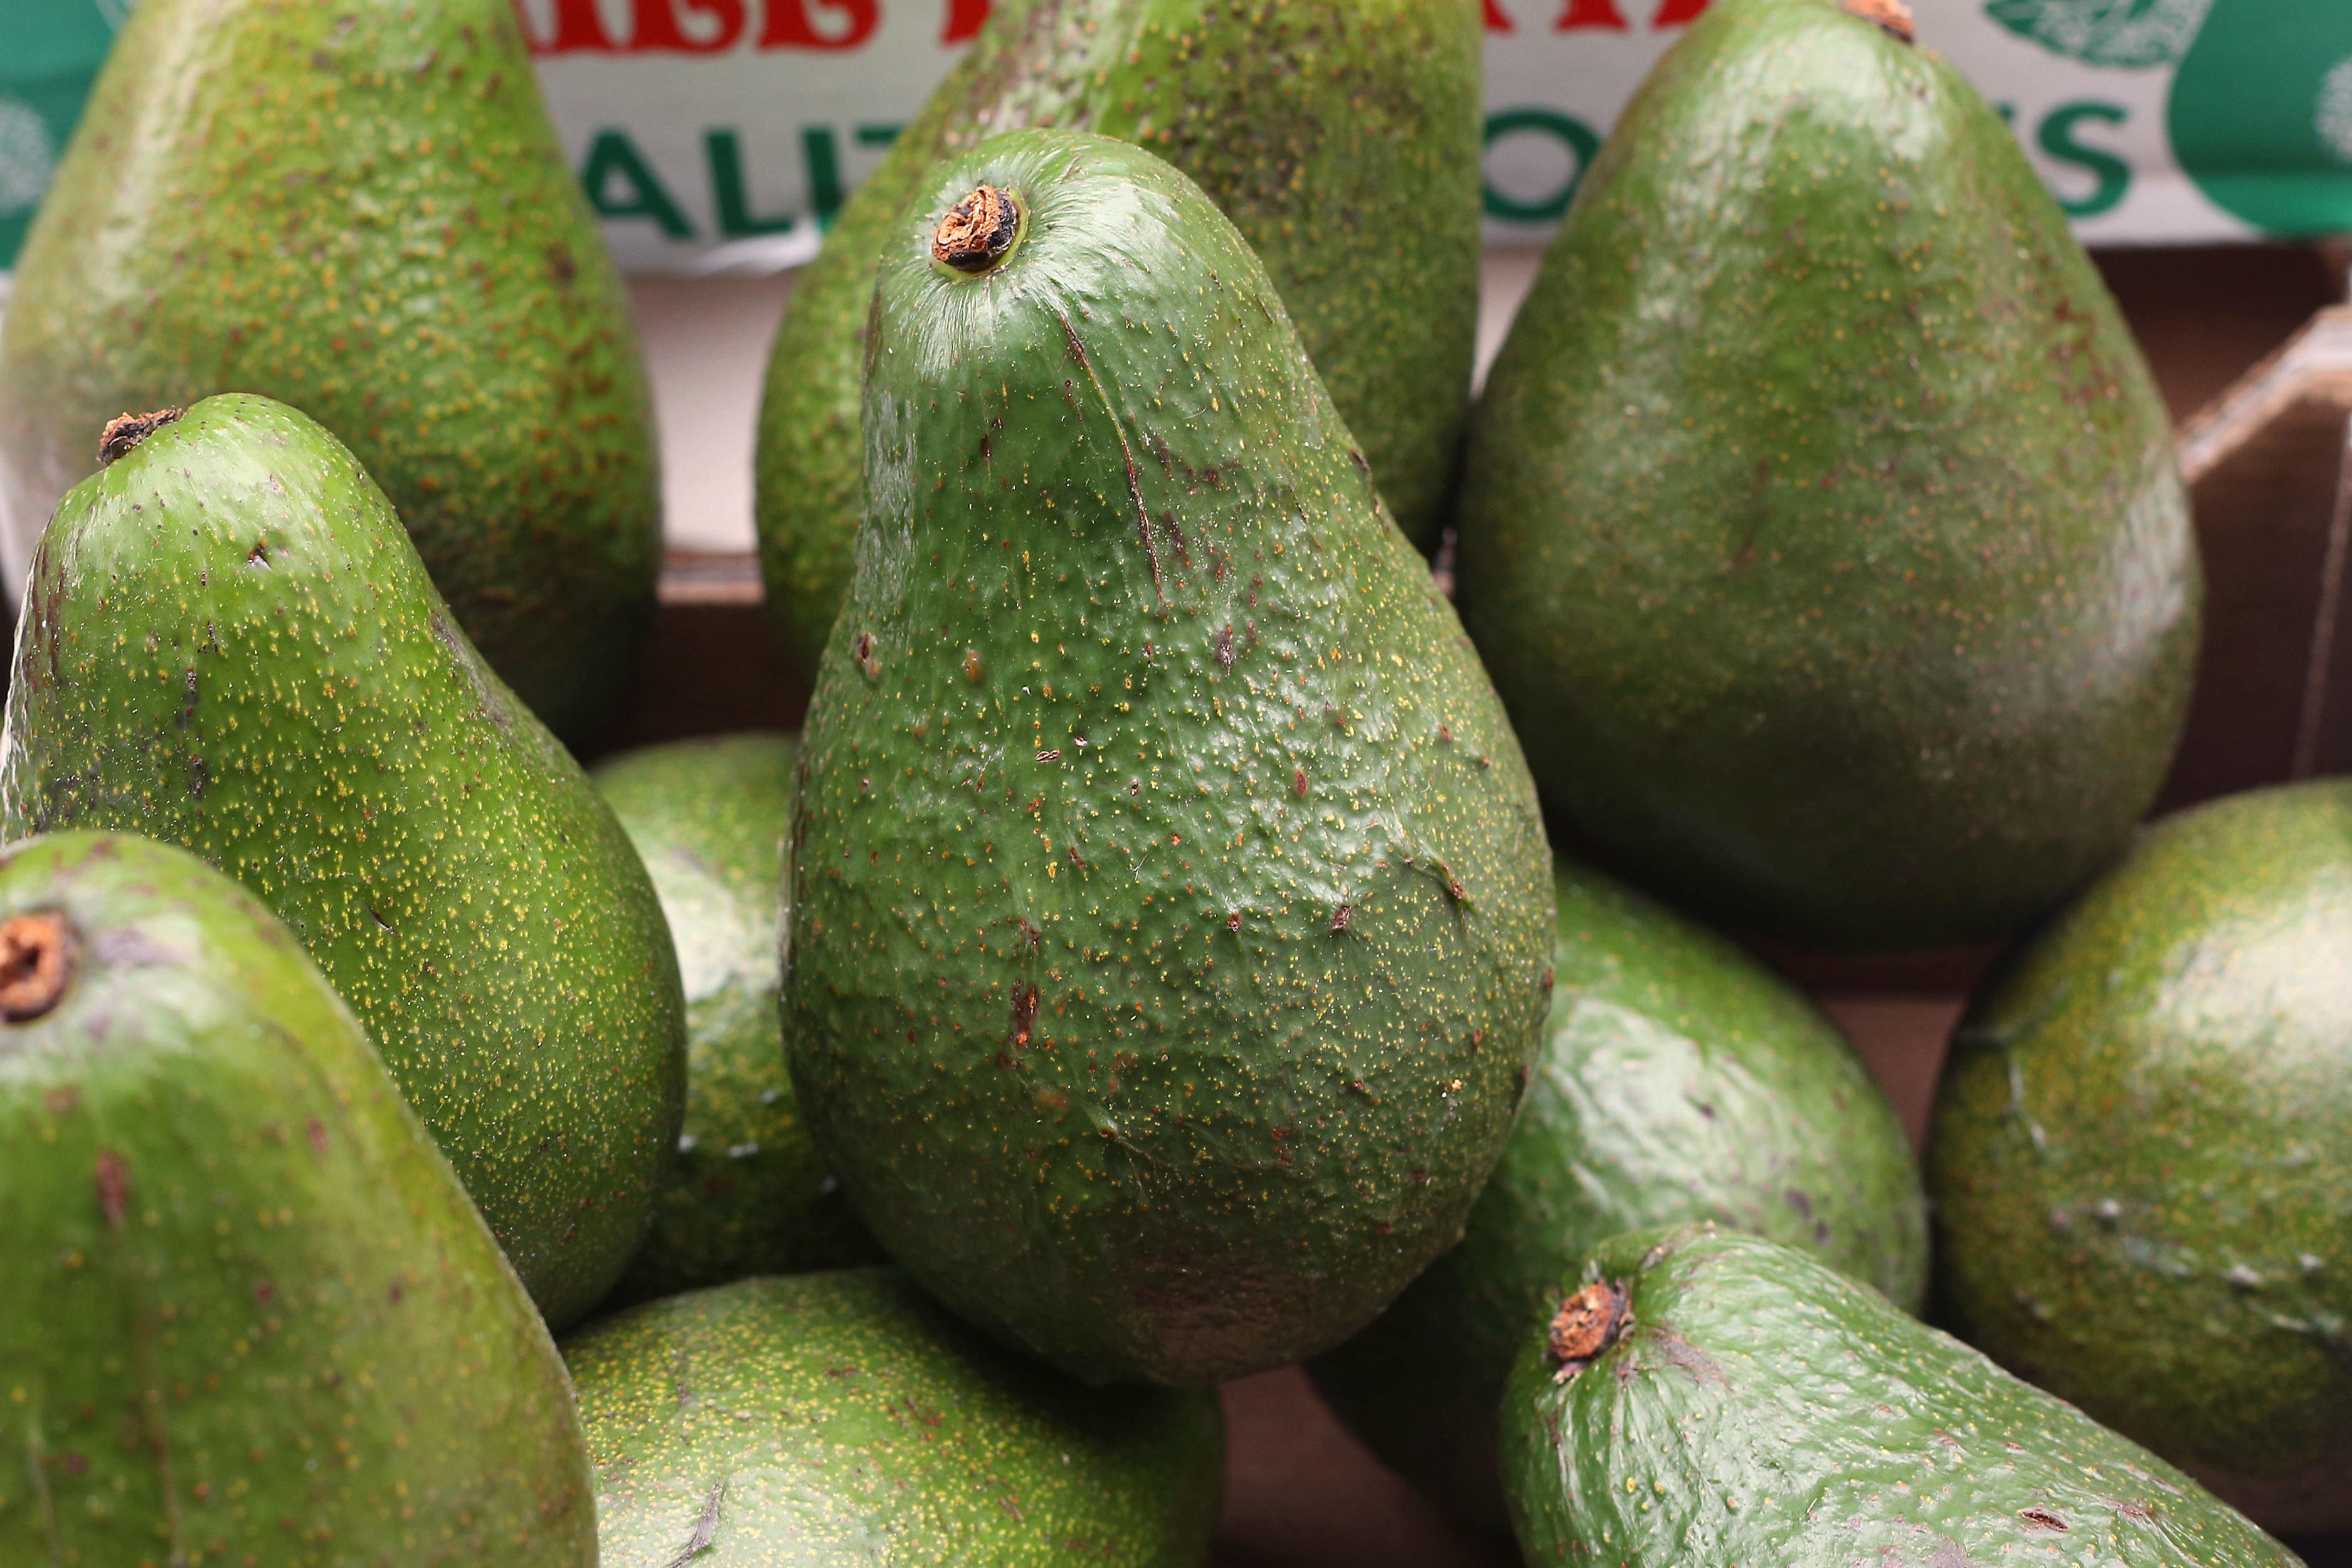 Tesco sells nearly 70 million avocados a year and has seen demand for the fruit grow by 15% in the last year